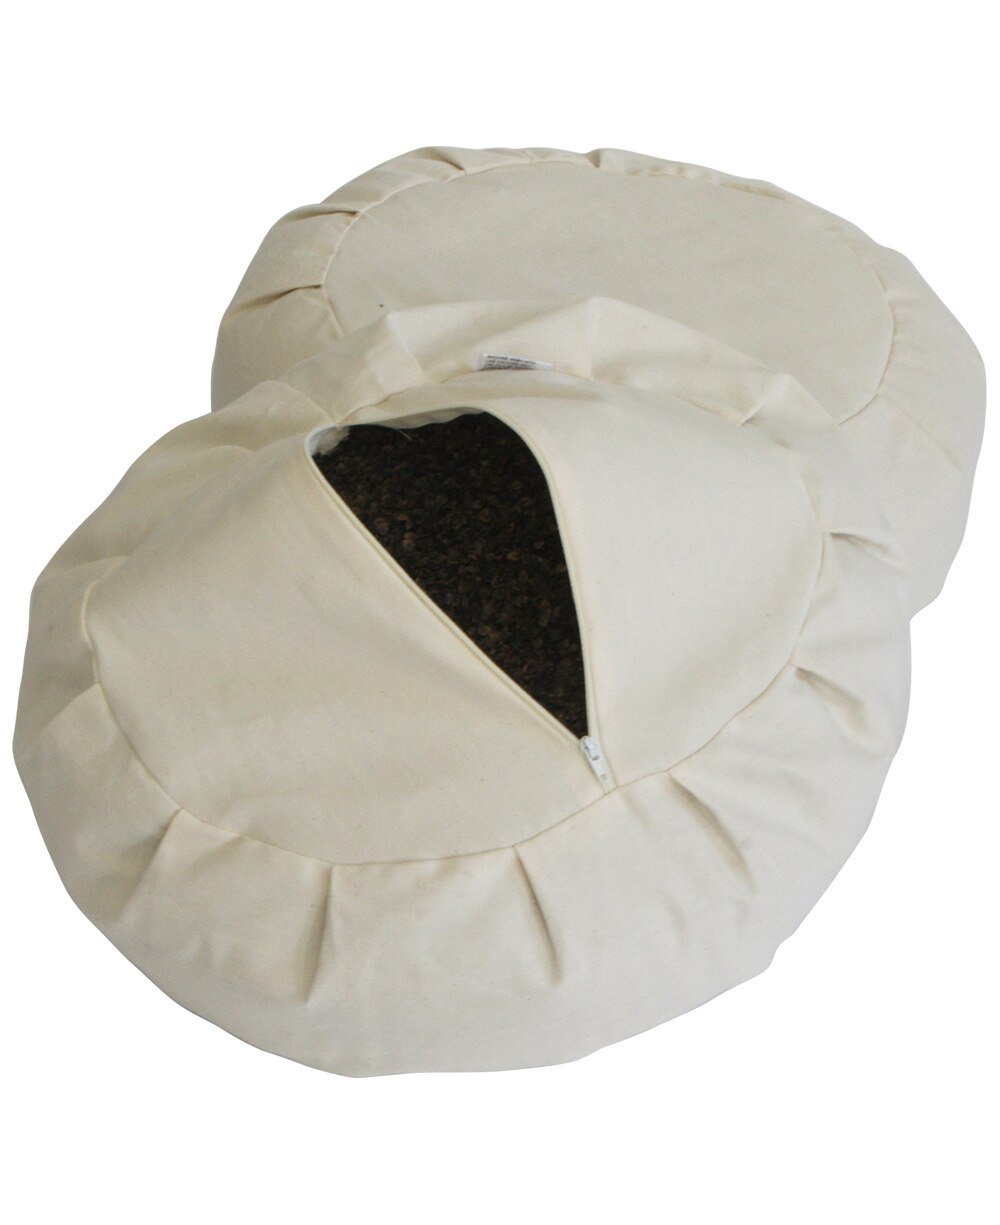 Luxe Quilted Zafu Meditation Cushion in Honeycomb - Massage Cushions Coffee